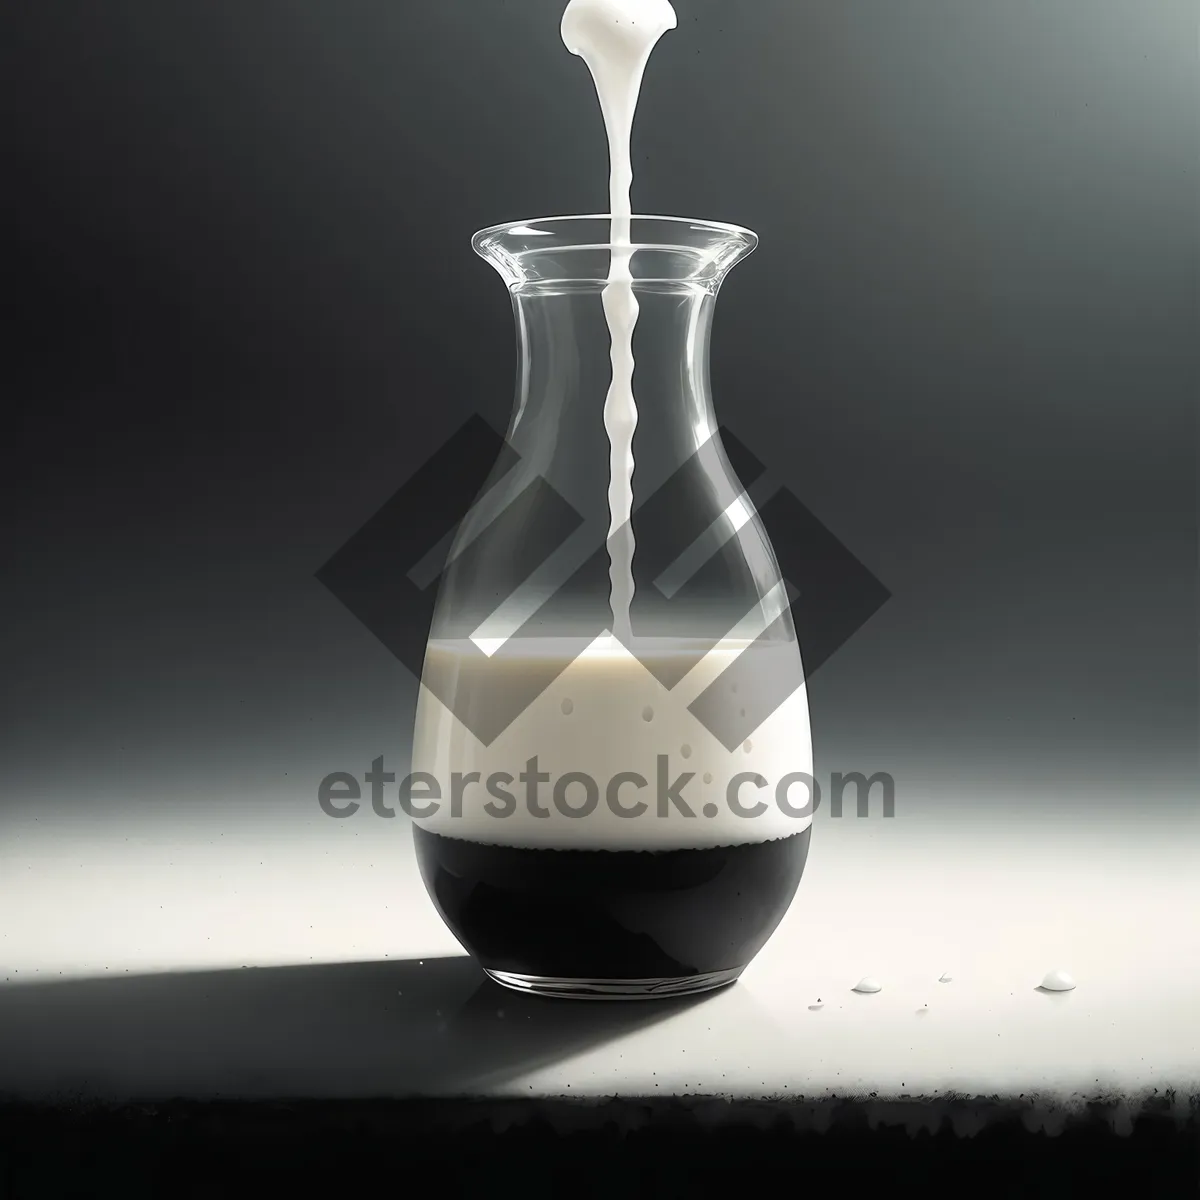 Picture of Chemical Experiment Glass Flask Laboratory Equipment